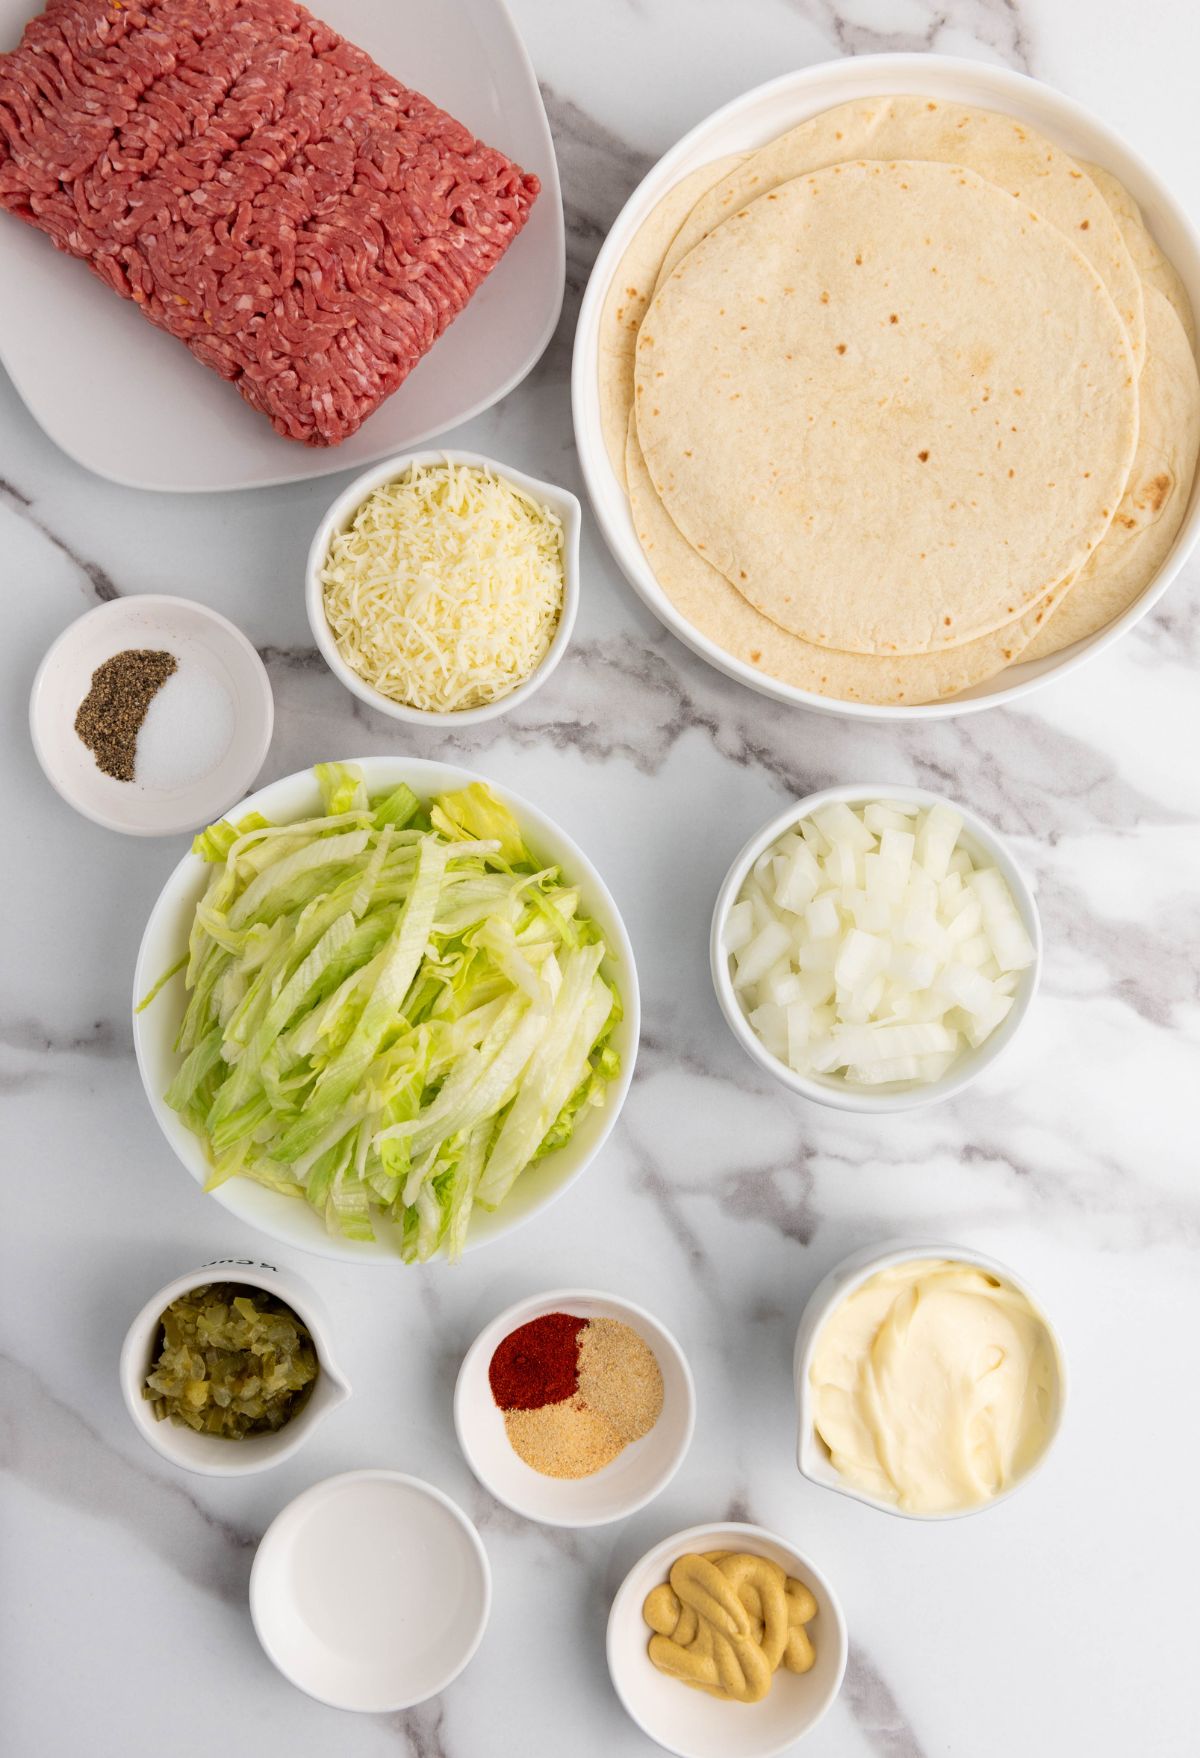 Ingredients for a meat and cheese burrito on a marble table.